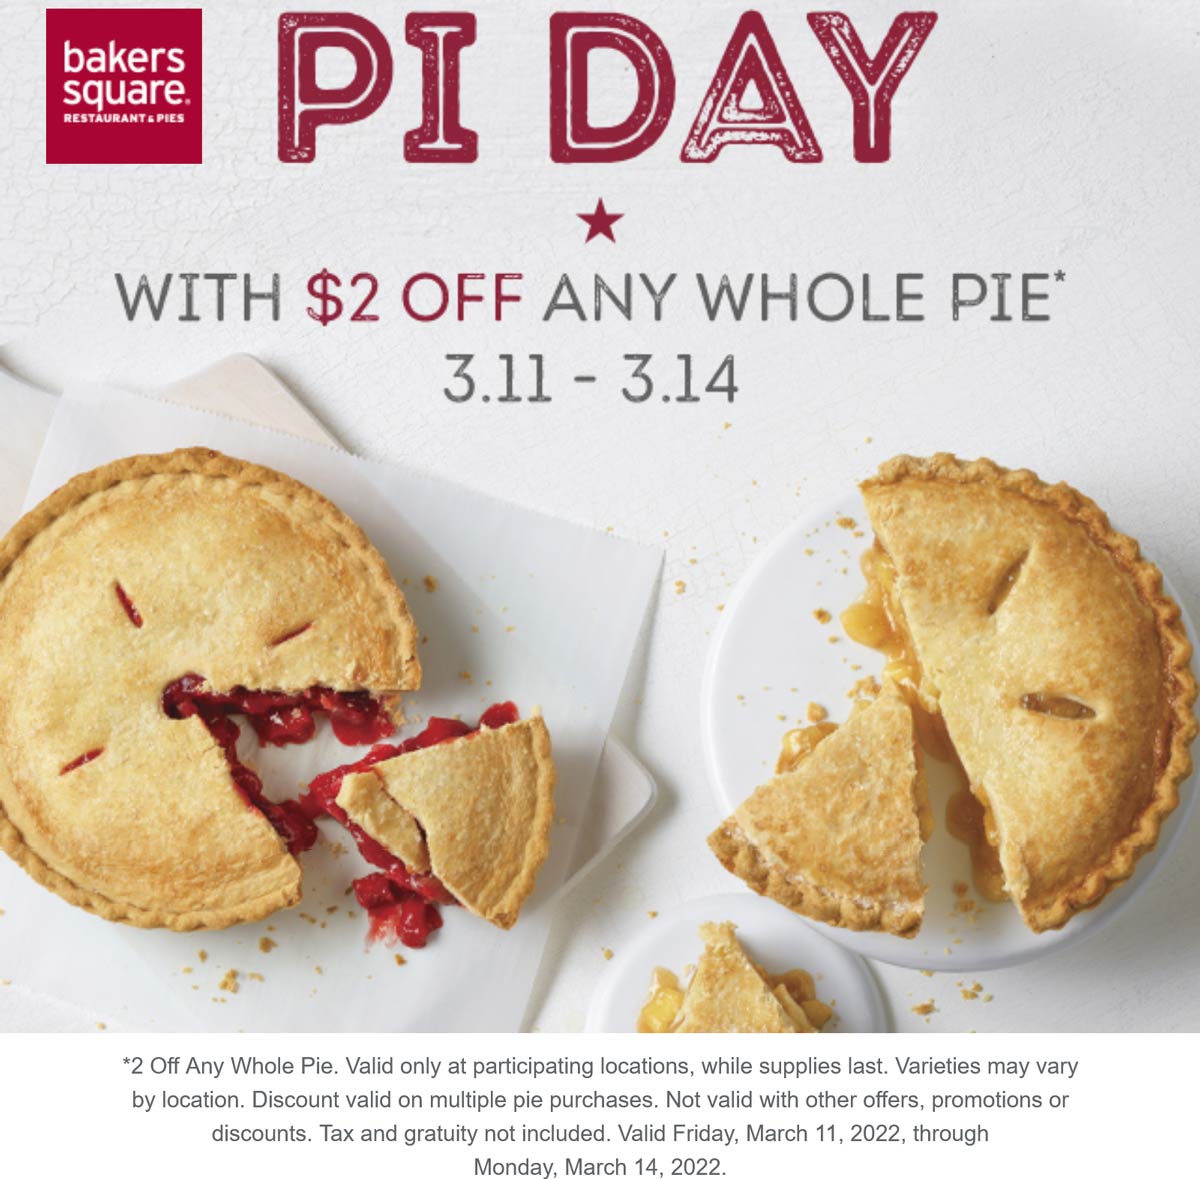 Bakers Square restaurants Coupon  $2 off any whole pie at Bakers Square #bakerssquare 